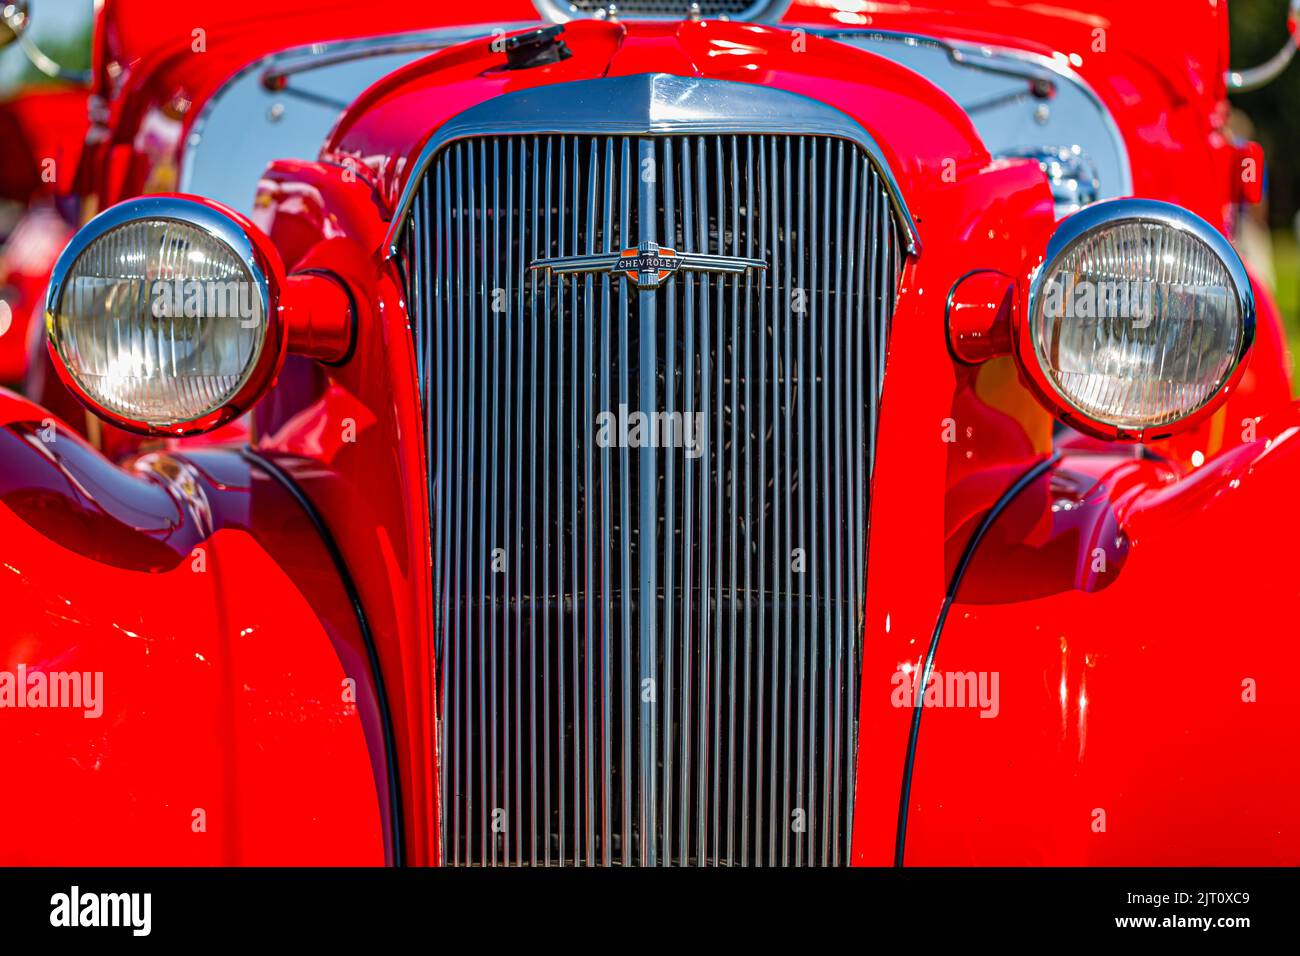 Statesboro, GA - May 17, 2014: Shallow depth of field closeup of the front trim detail on a 1937 Chevrolet Master Deluxe Coupe. Stock Photo